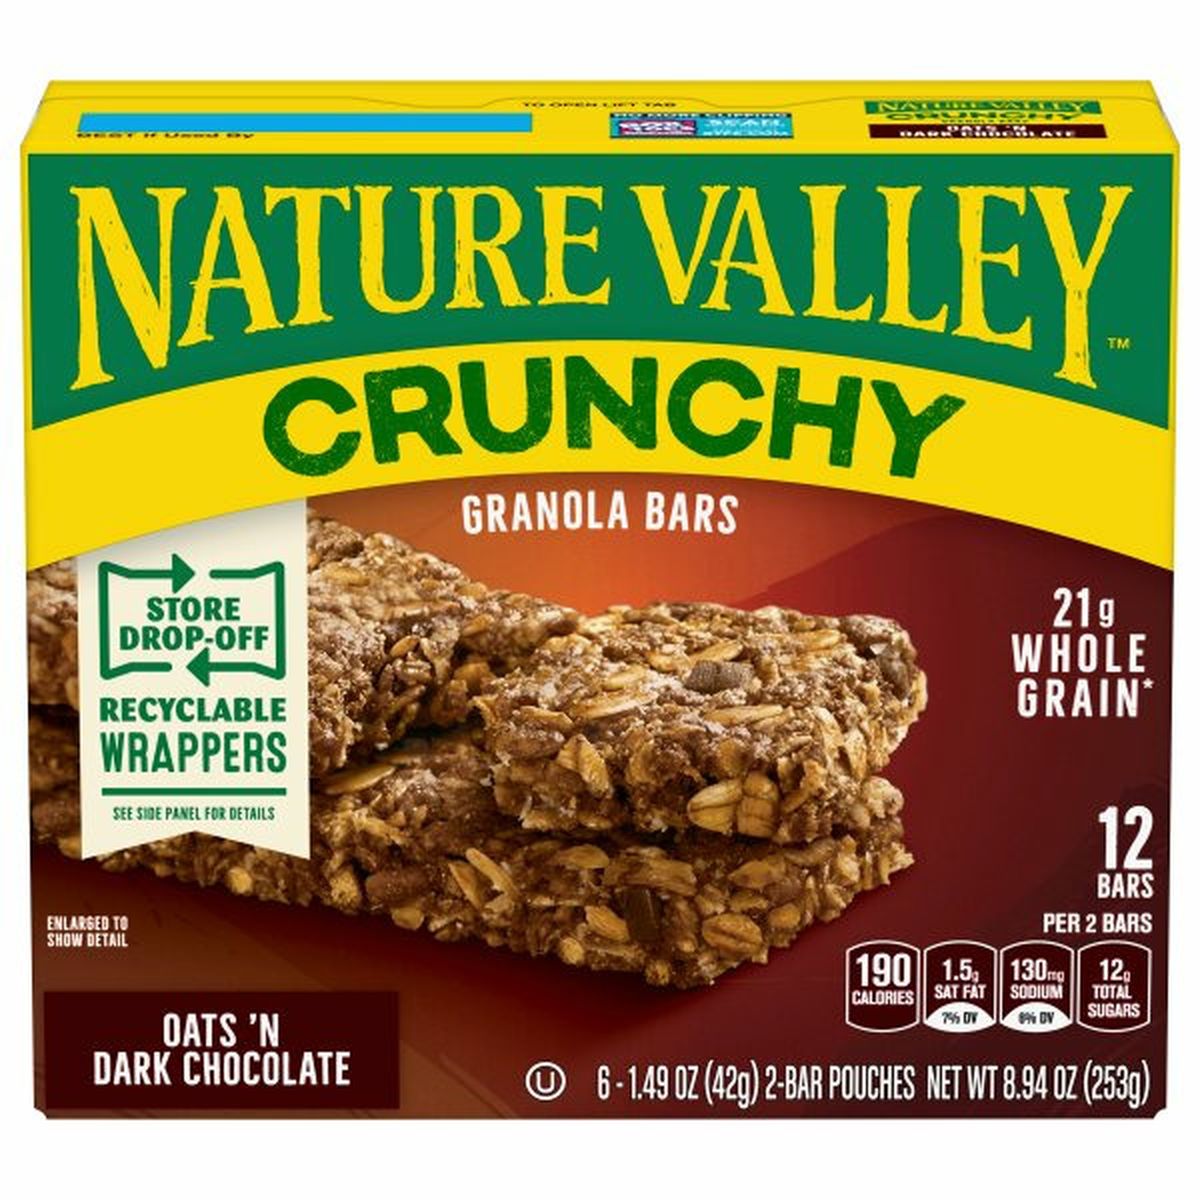 Calories in Nature Valley Granola Bars, Crunchy, Oats 'N Dark Chocolate